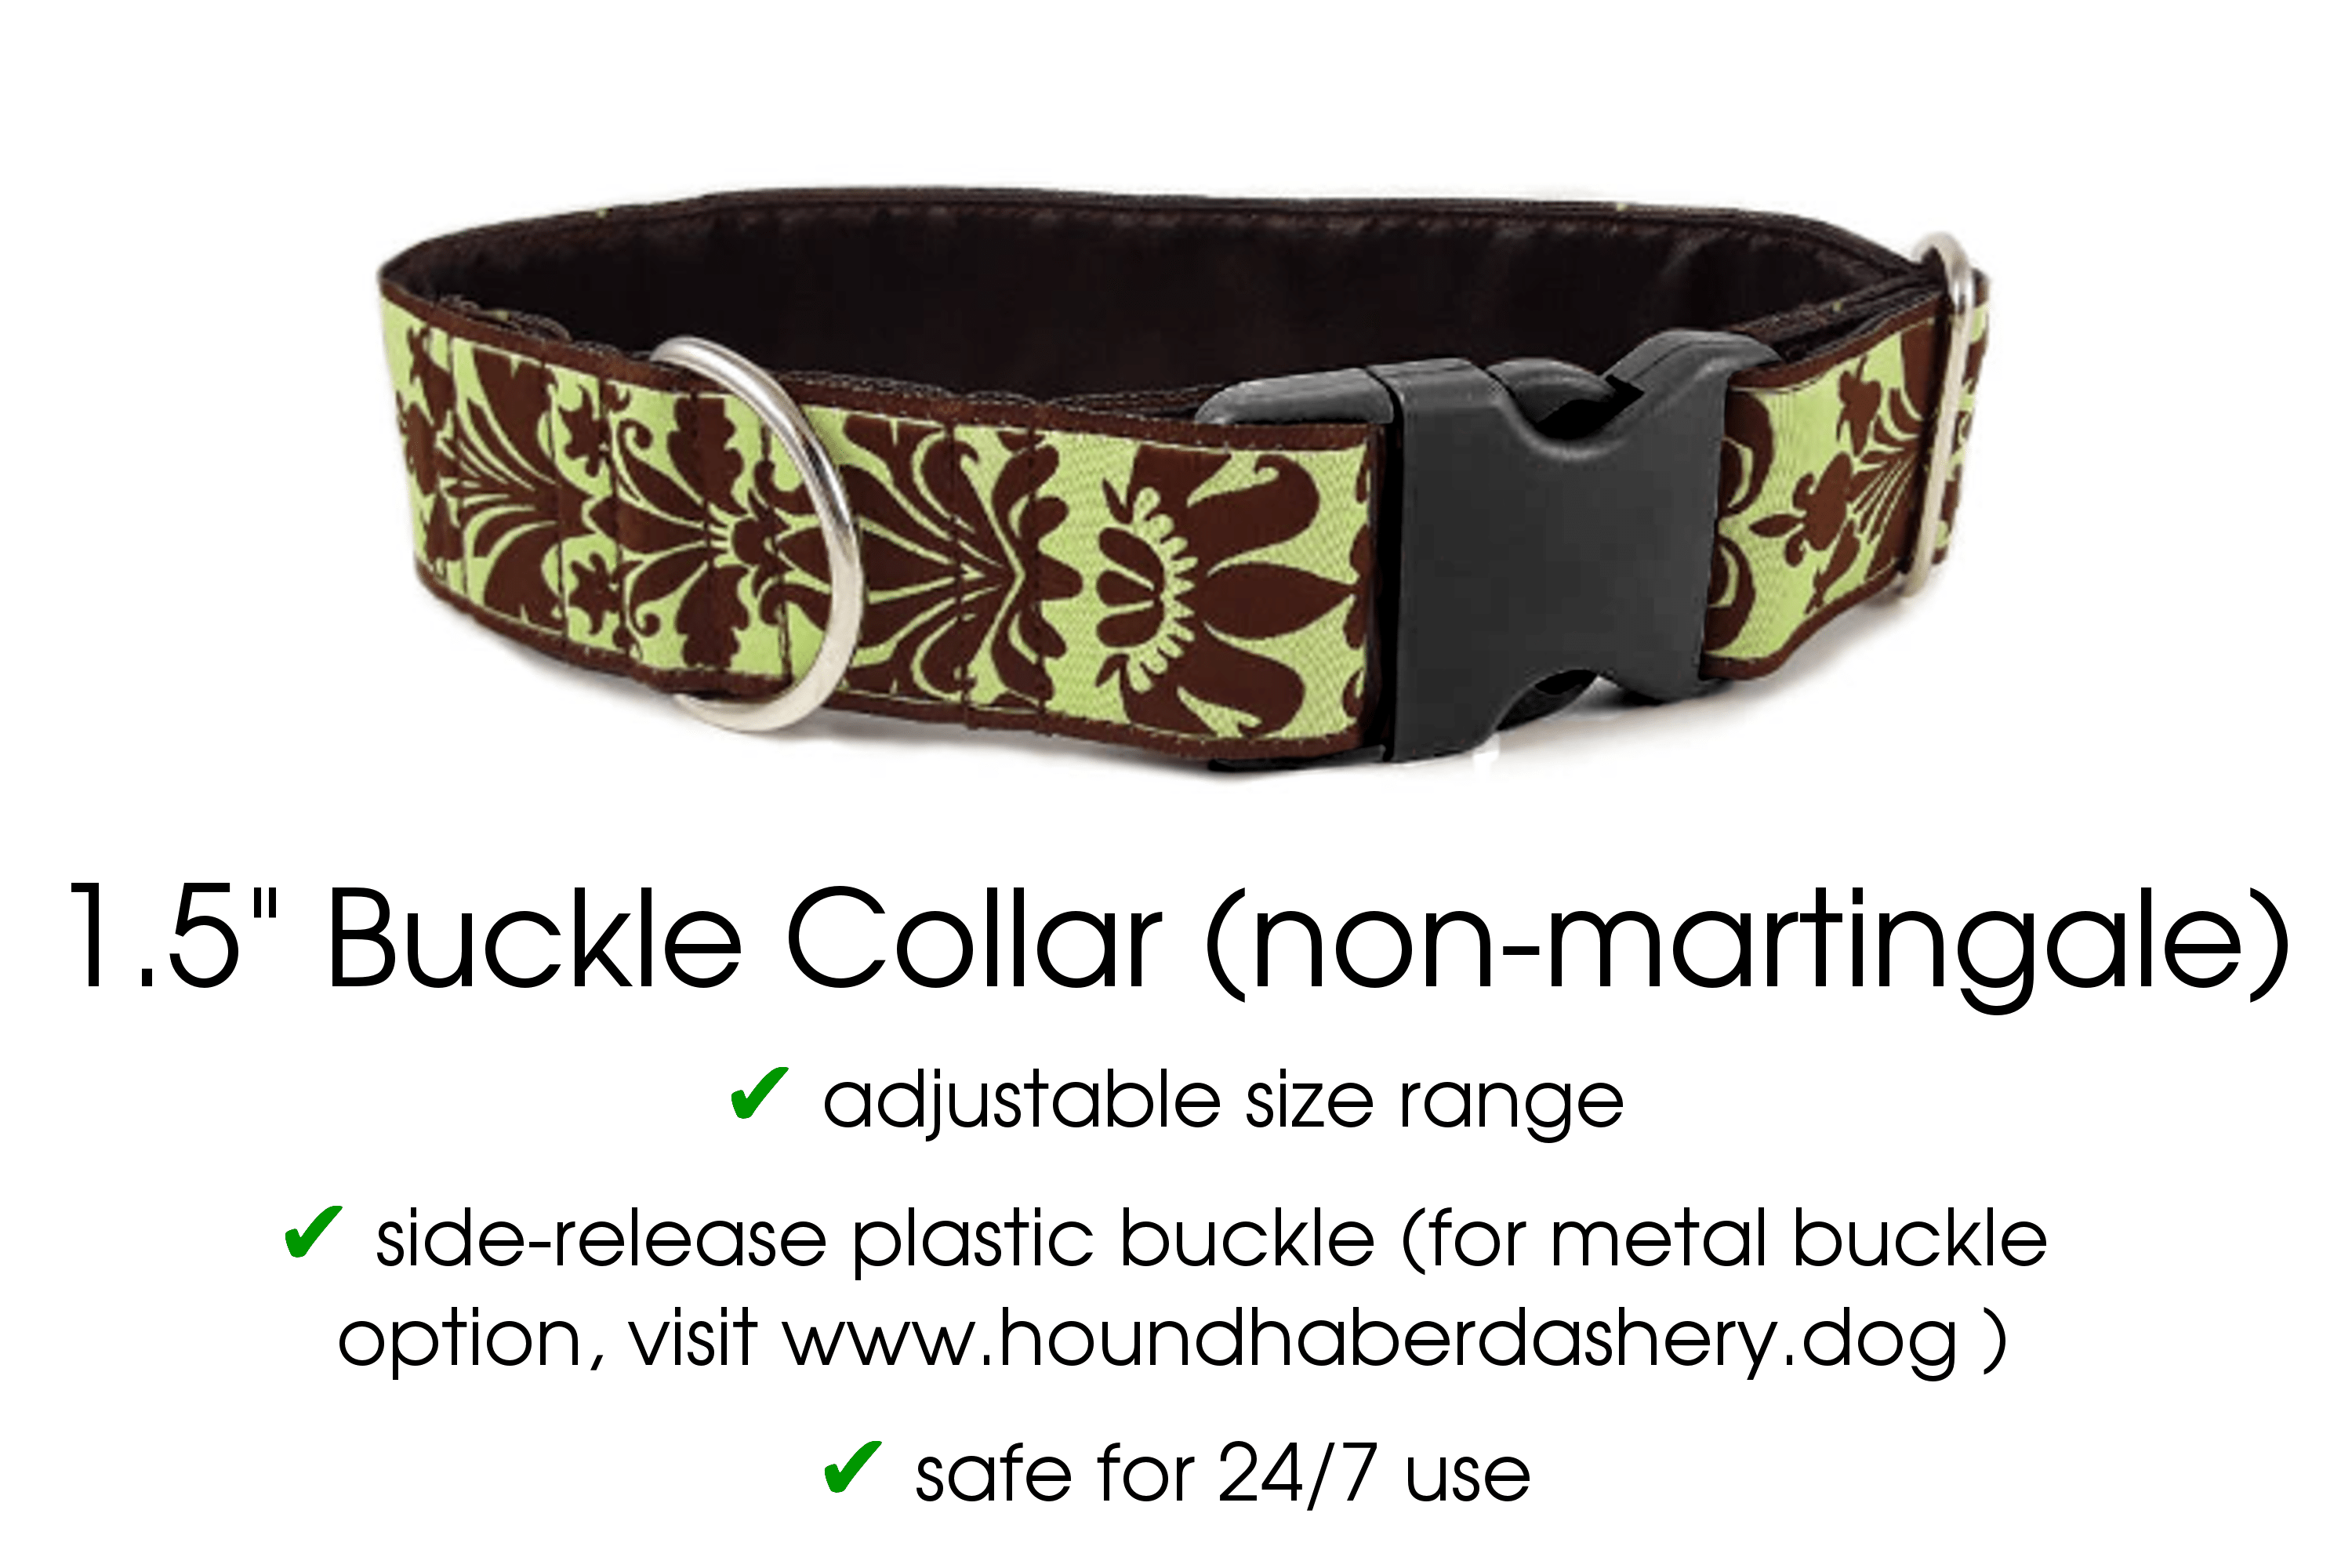 Lyons Damask in Green and Chocolate - Martingale Dog Collar or Buckle Dog Collar - 1.5" Width - The Hound Haberdashery